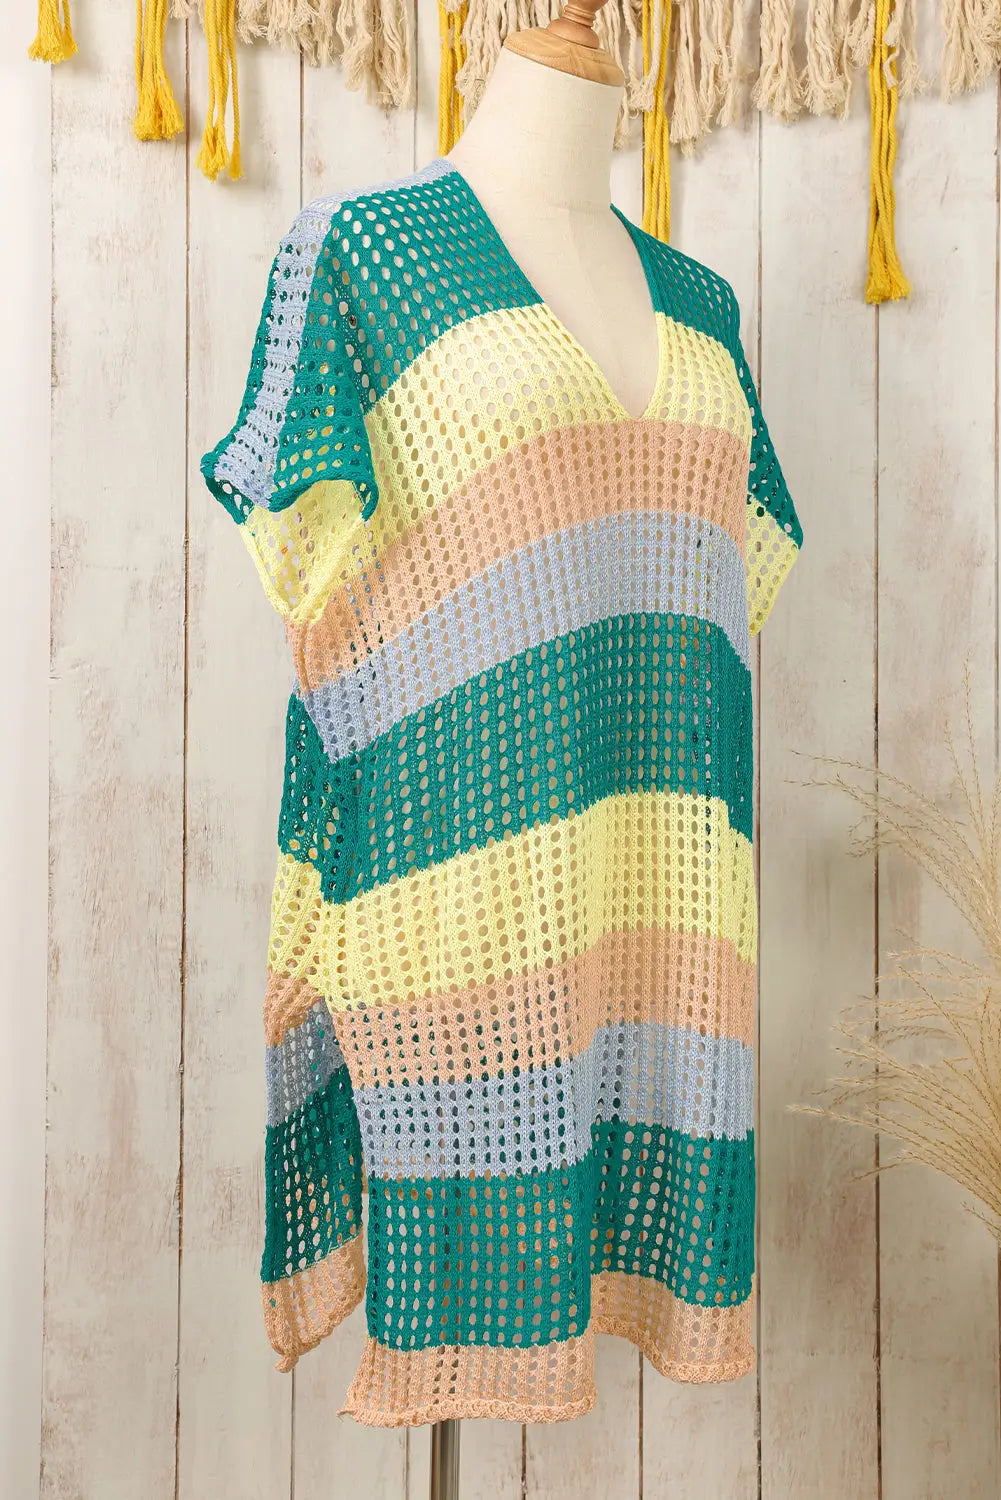 Striped tunic beach cover up - ups